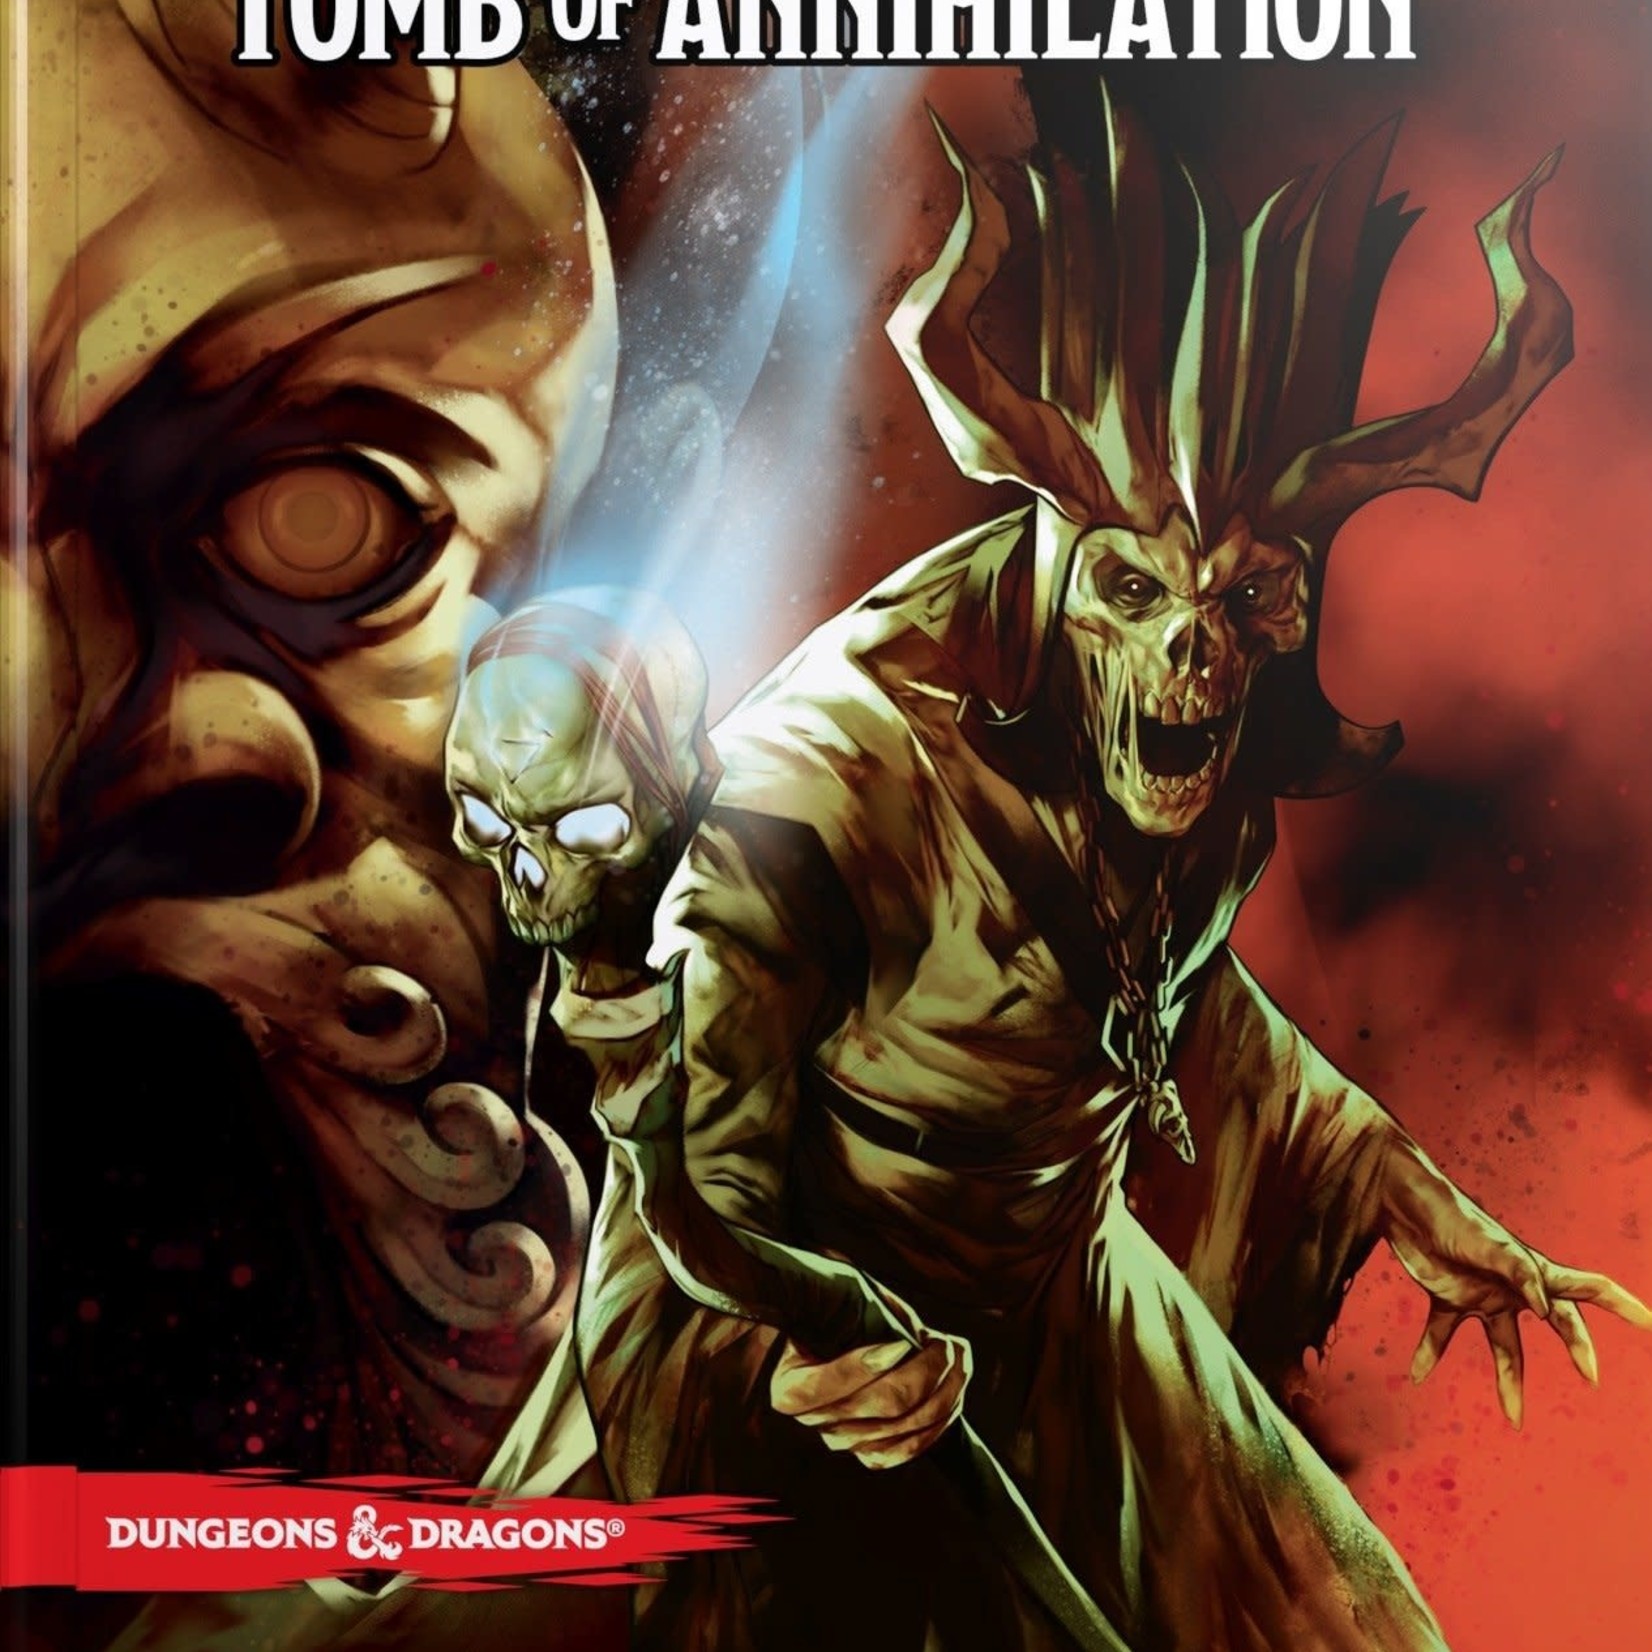 Wizards of the Coast Dungeons & Dragons 5th Edition - Tomb of Annihilation